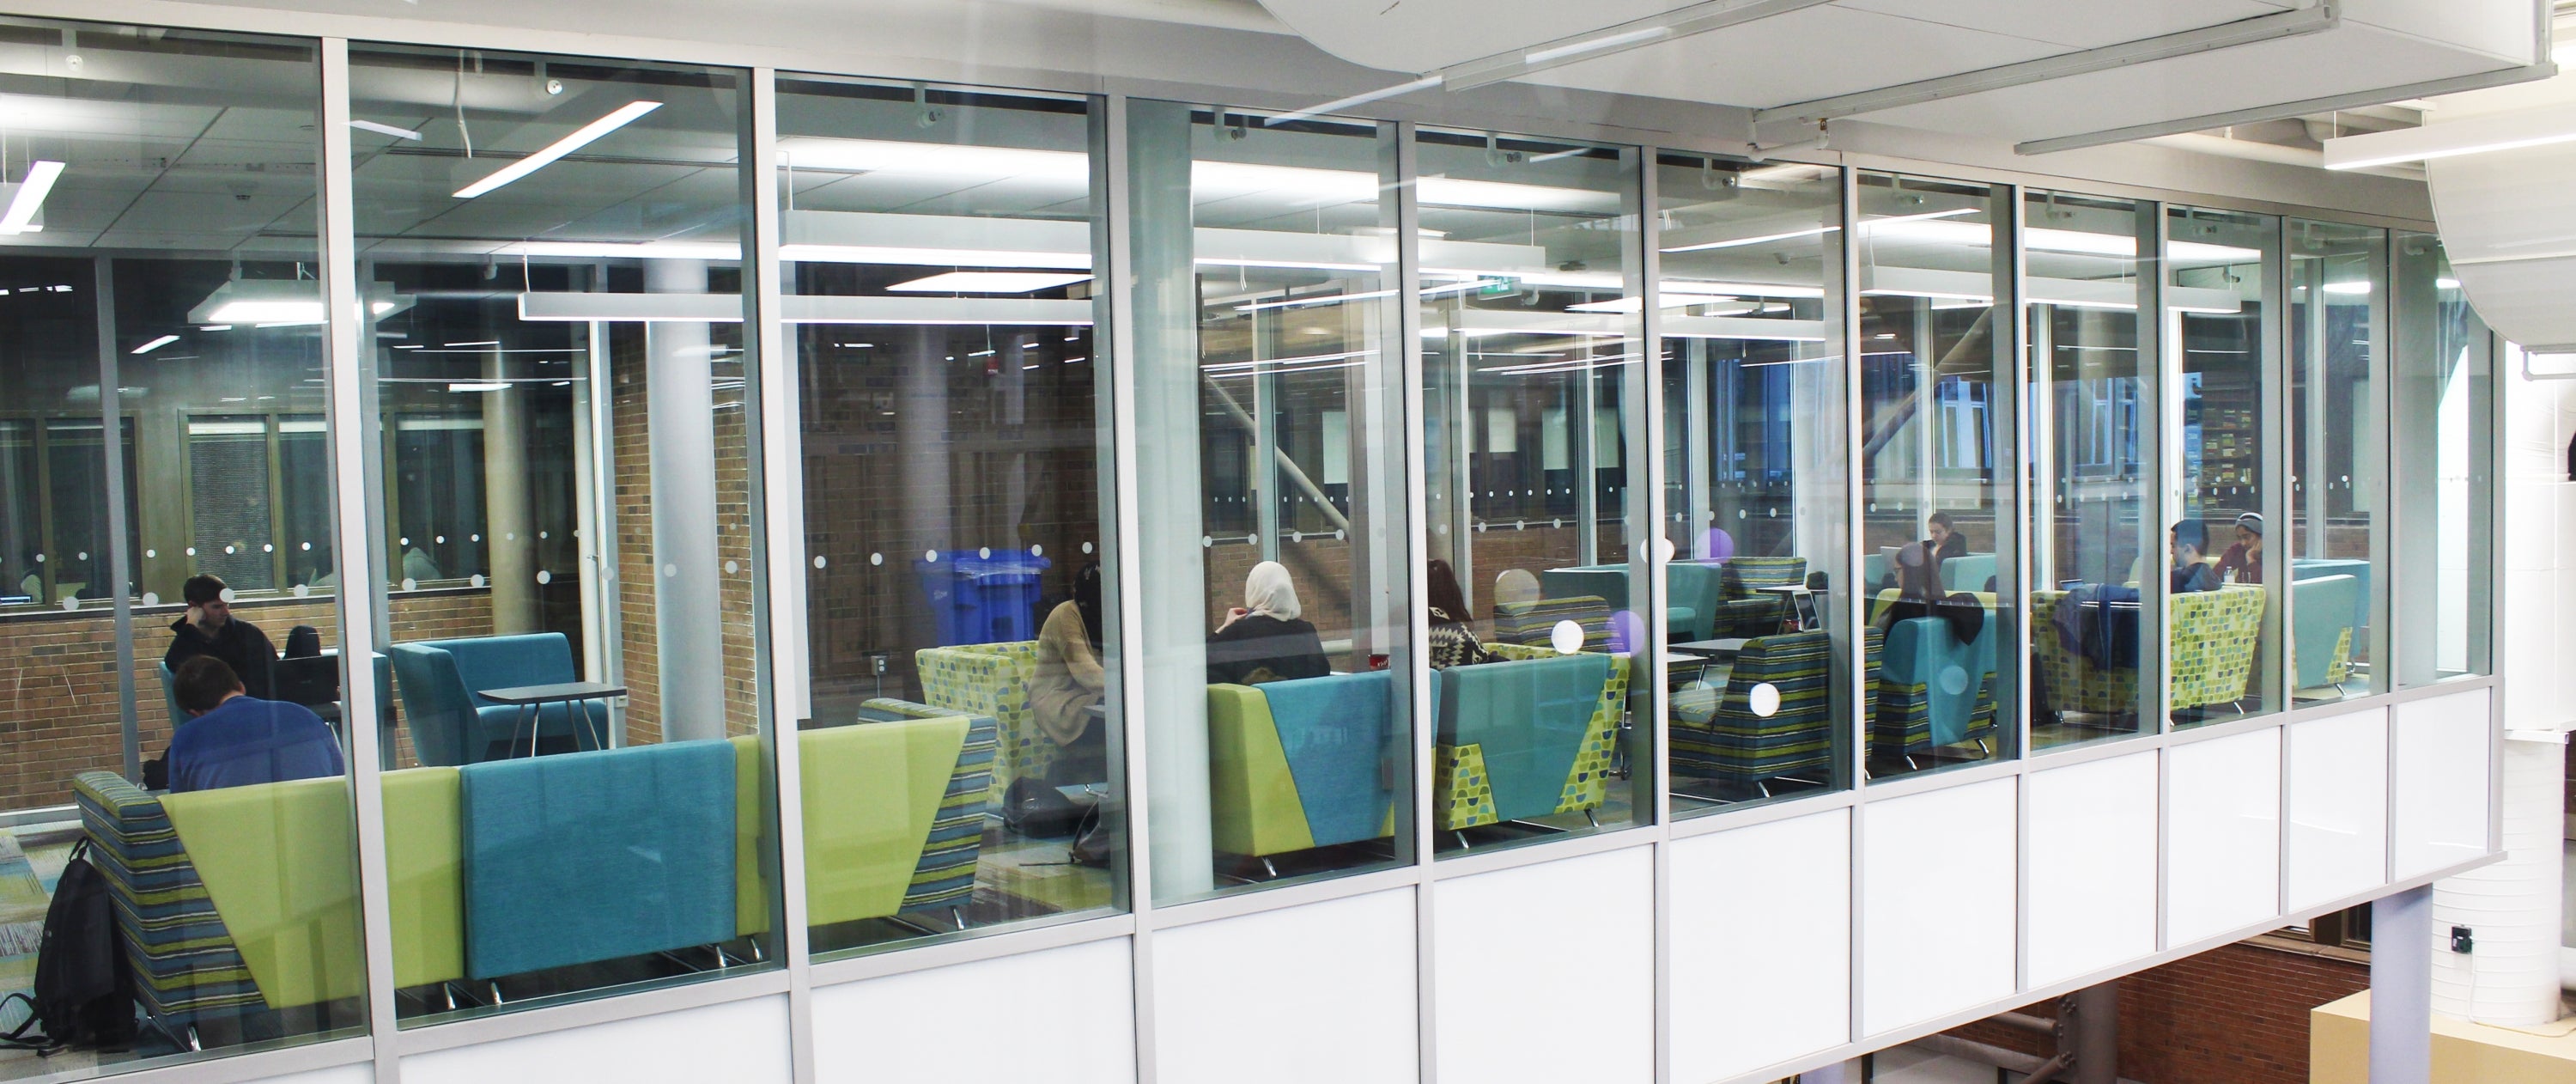 third floor study deck of the hub, with students seated